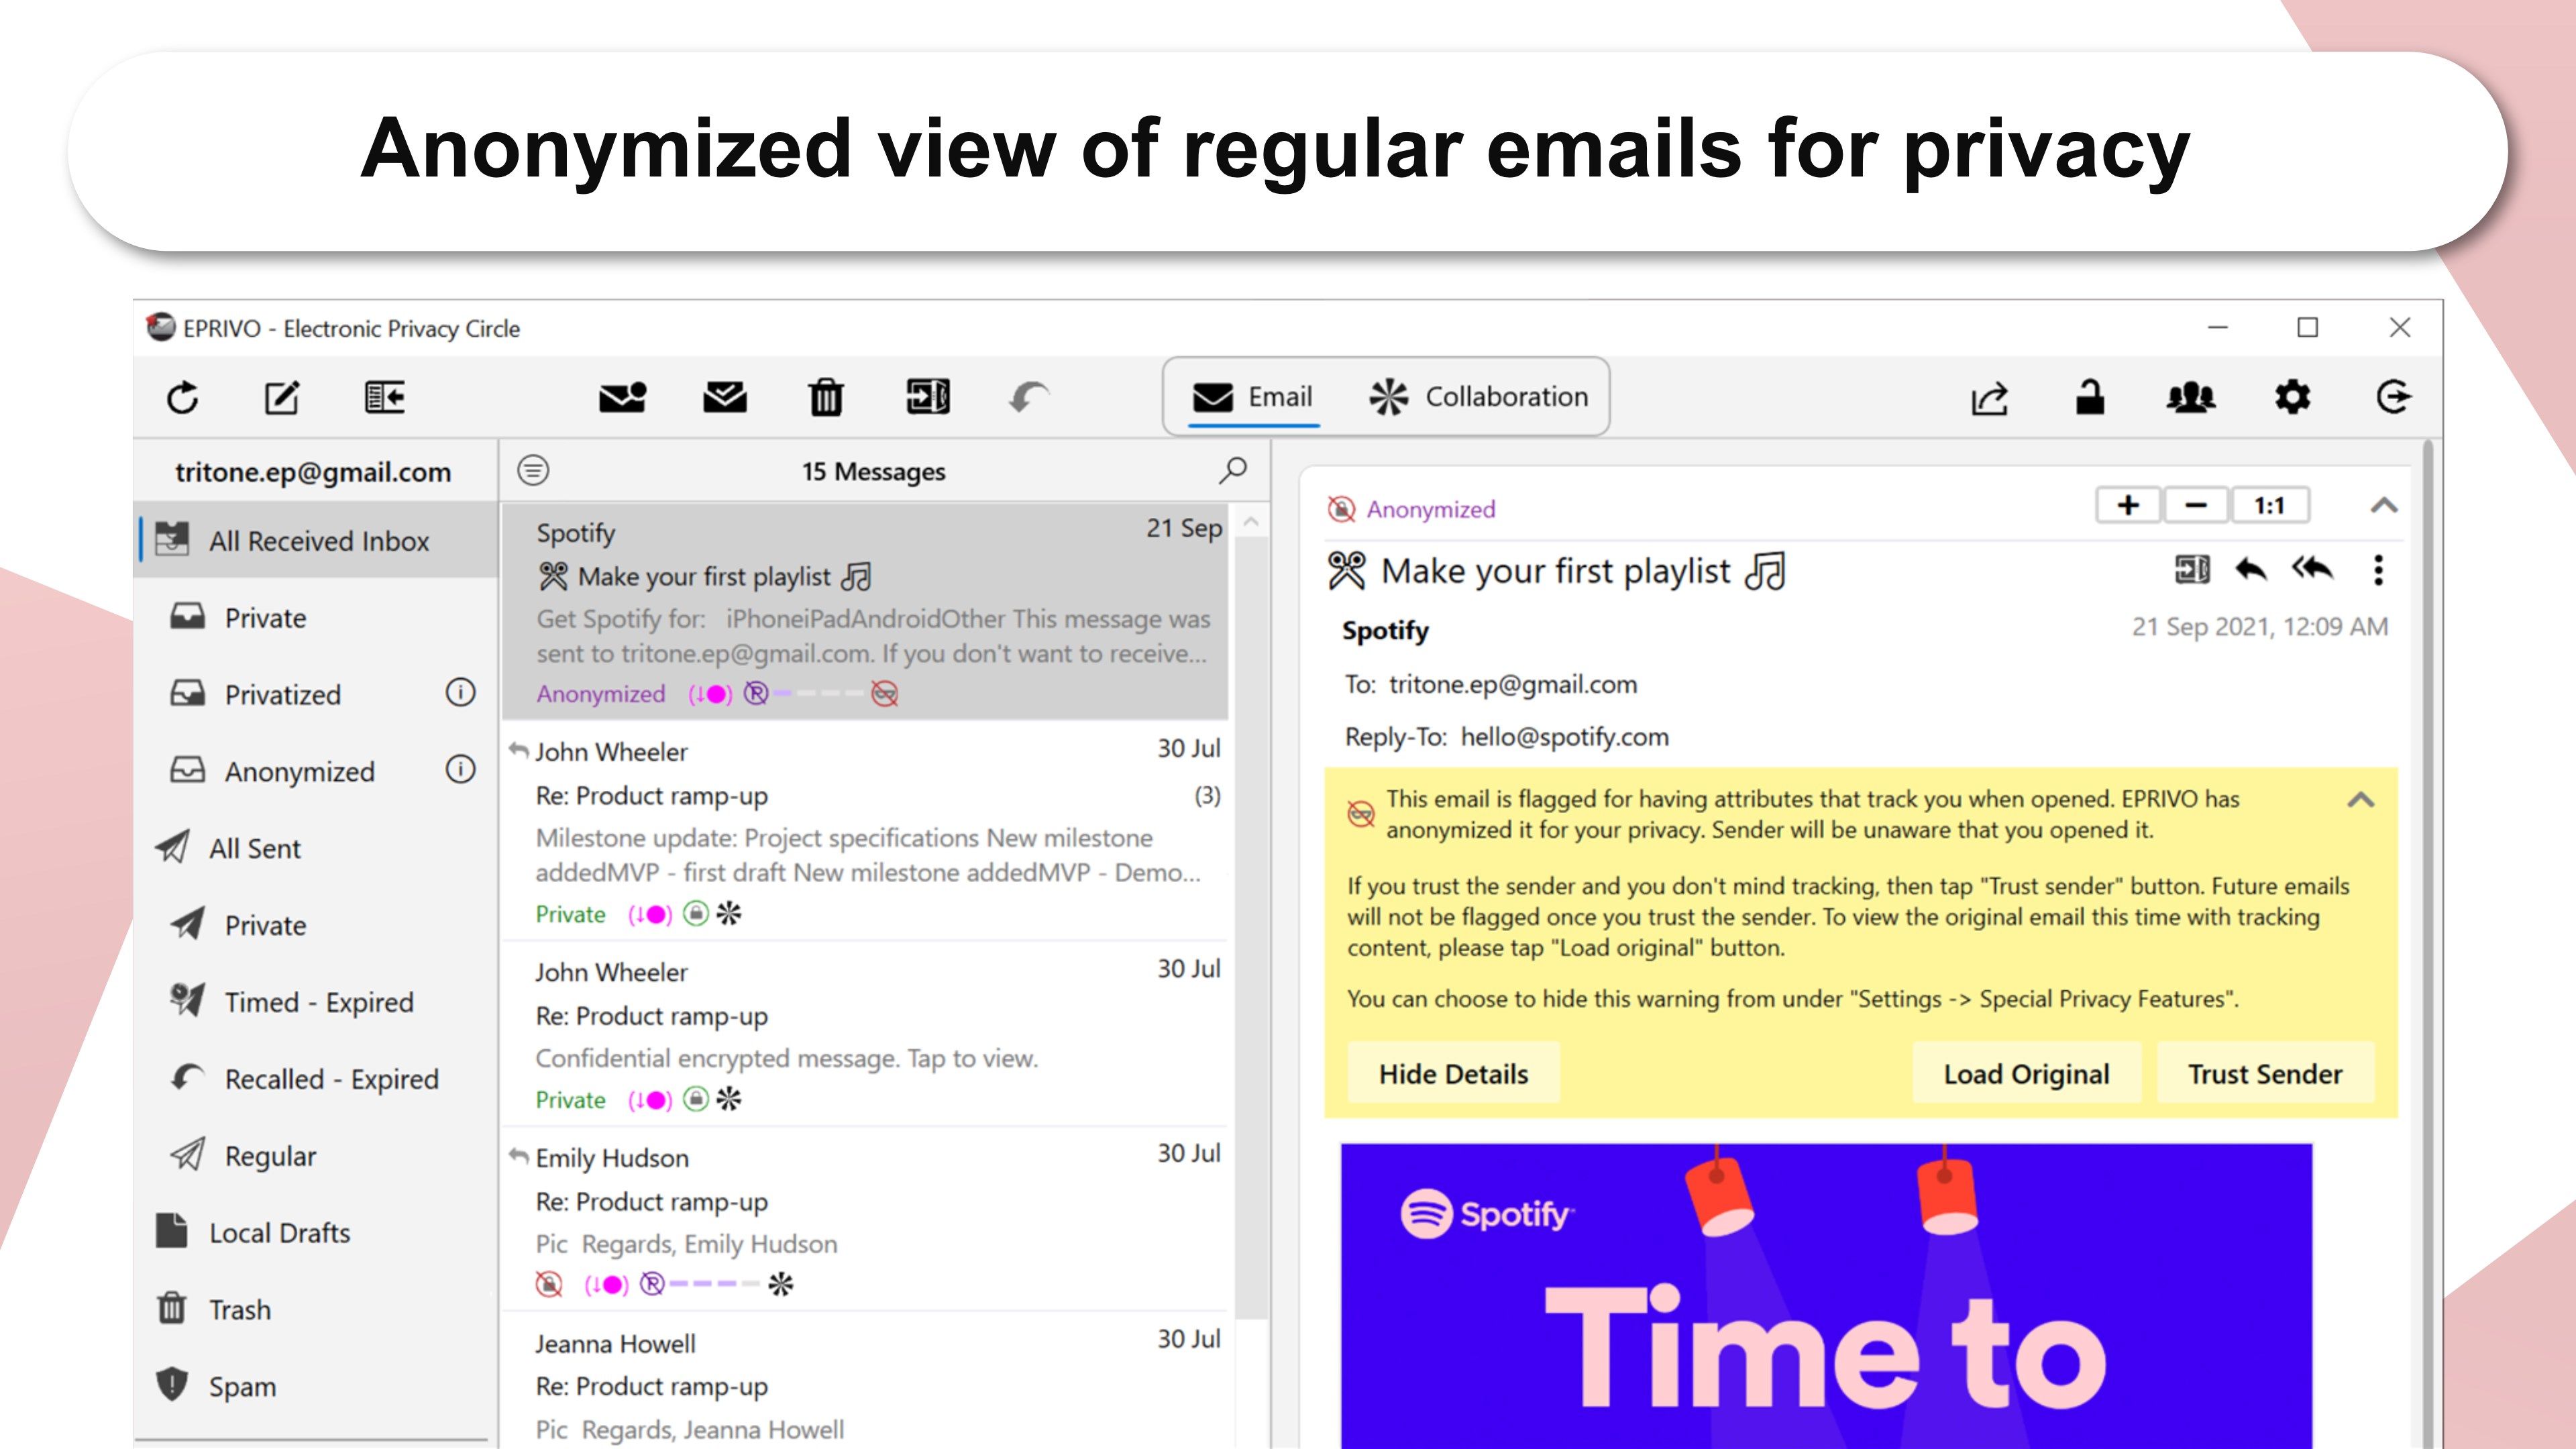 Anonymized view of regular emails for privacy